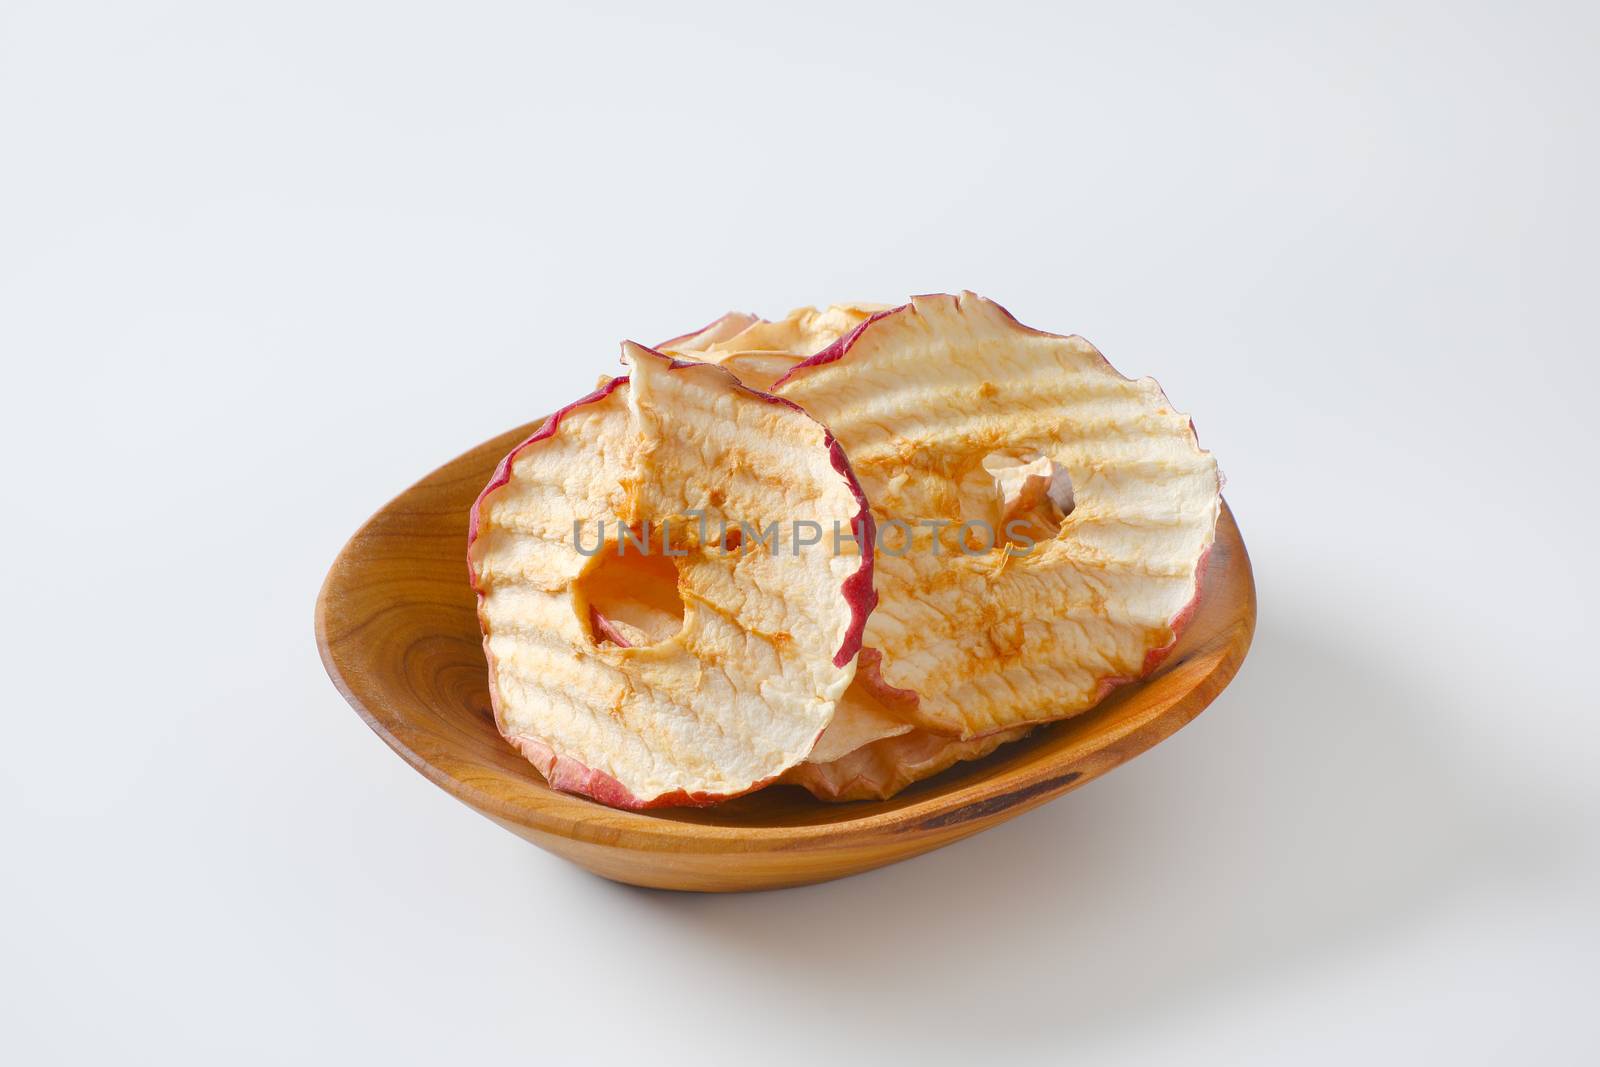 Bowl of dried apple slices - apple chips or rings